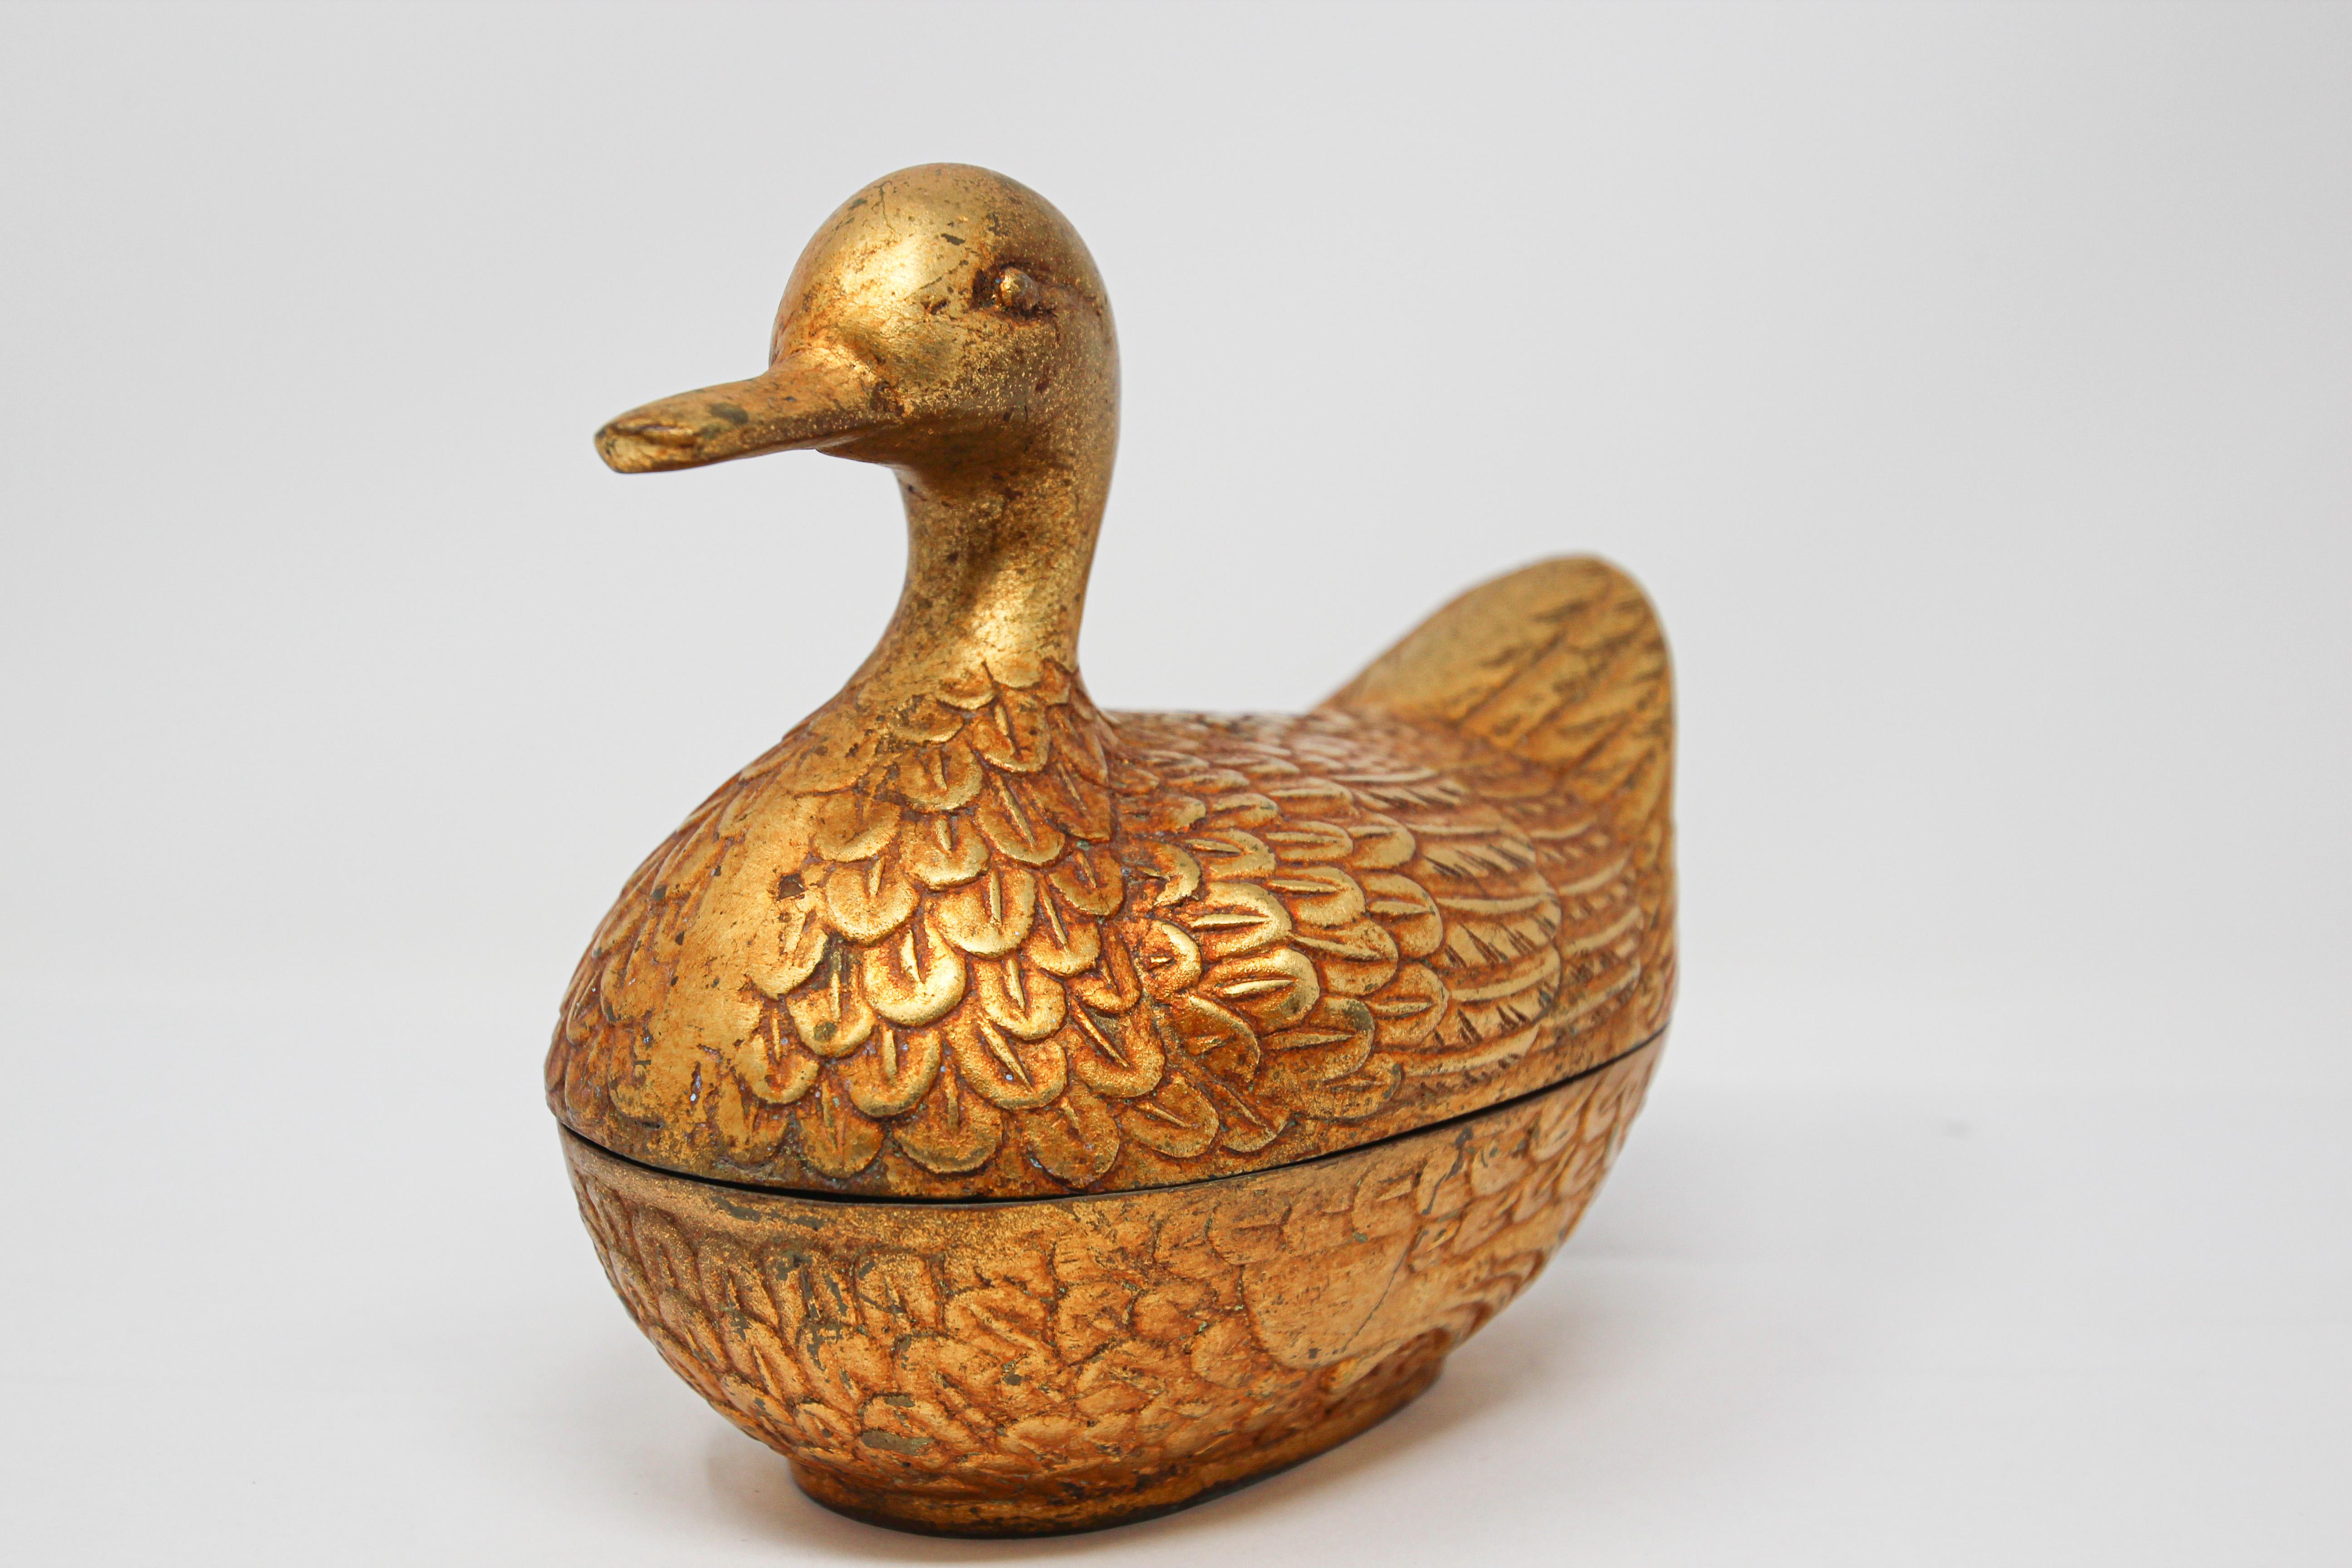 Handcrafted decorative vintage collectible brass nut duck shape trinket box.
Beautiful handcrafted large cast brass bird form box with lid.
Vintage two-piece solid brass figural duck trinket box.
Probably used as a nut box or treasure